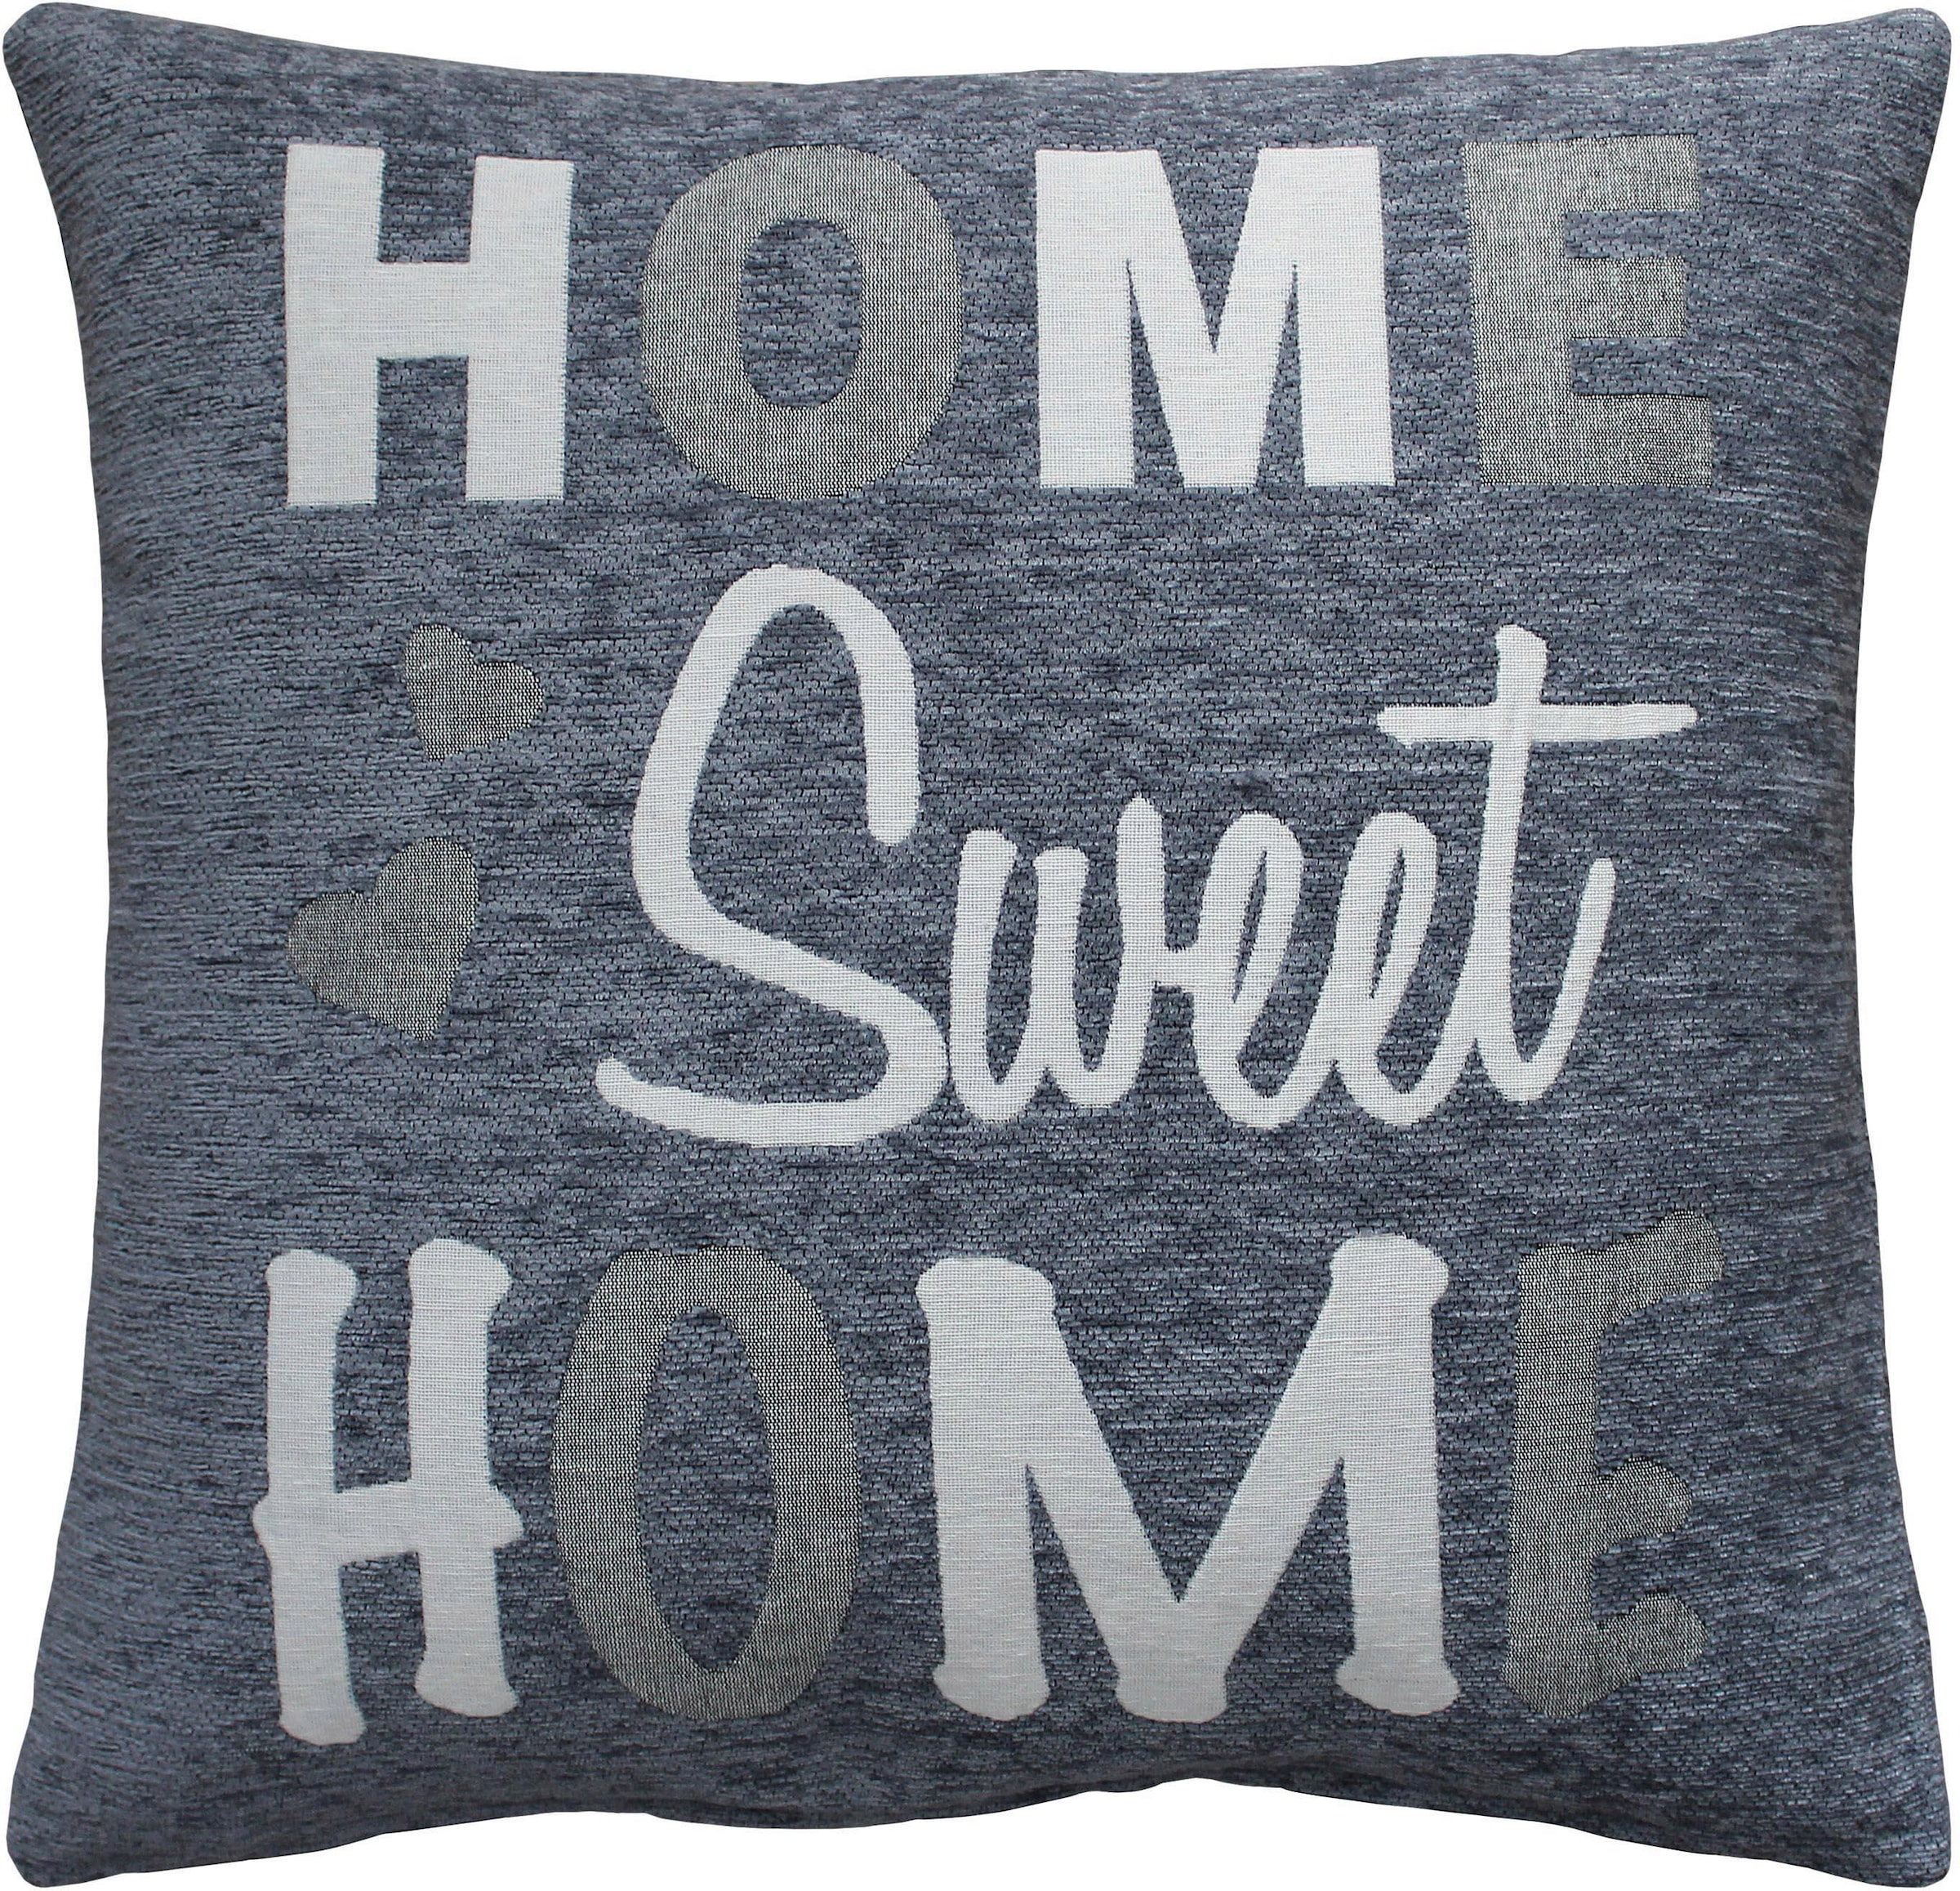 HOSSNER - HOMECOLLECTION Kissenhülle »Home Sweet Home«, (2 St.)